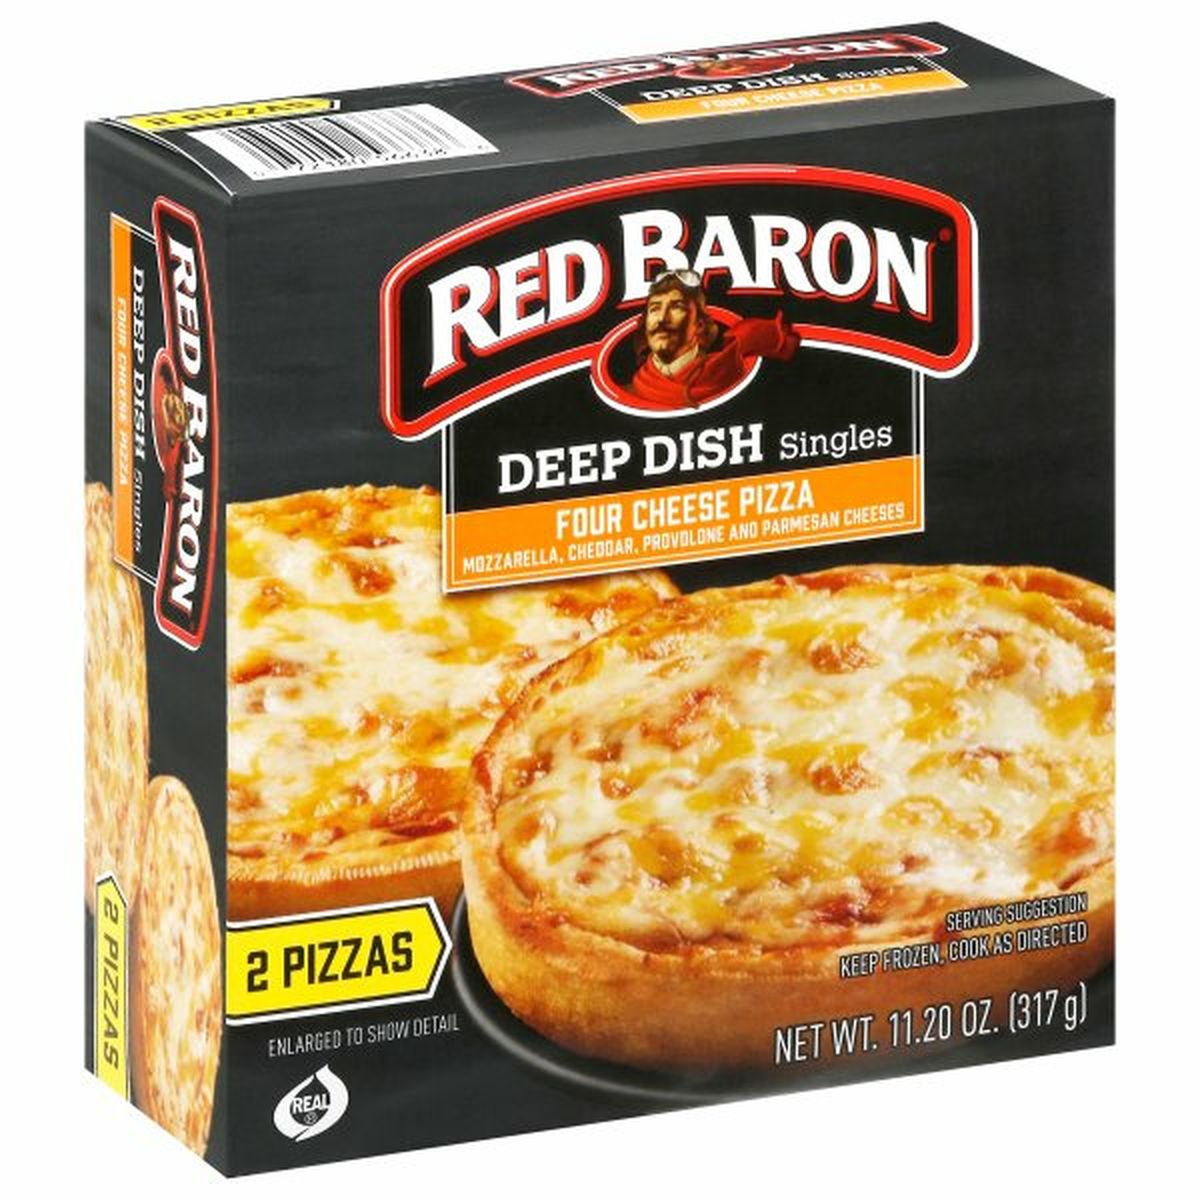 Calories in Red Baron Pizza, Four Cheese, Deep Dish, Singles